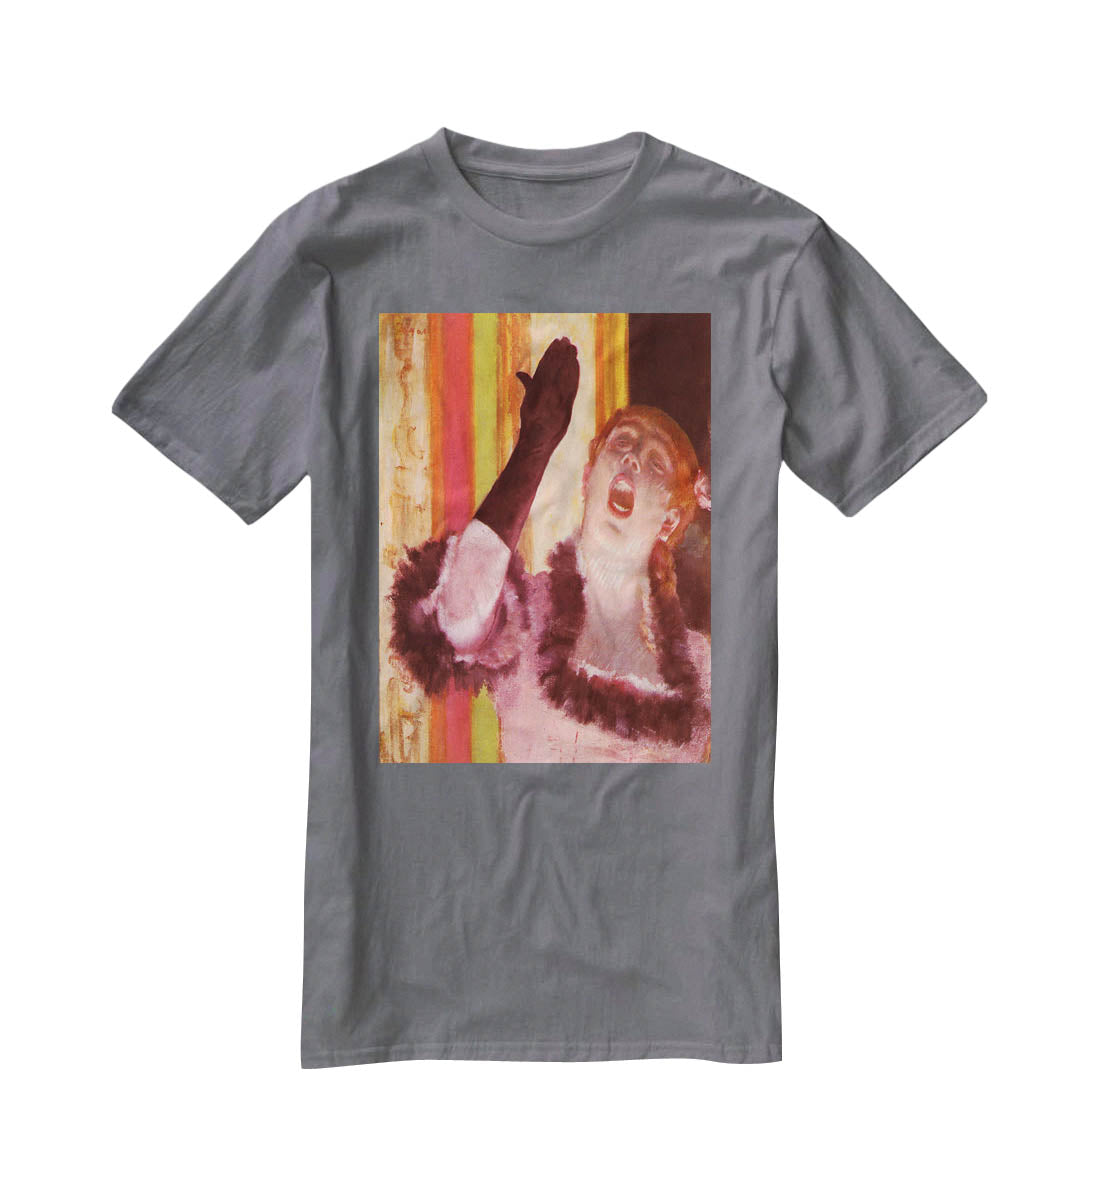 The singer with the glove by Degas T-Shirt - Canvas Art Rocks - 3